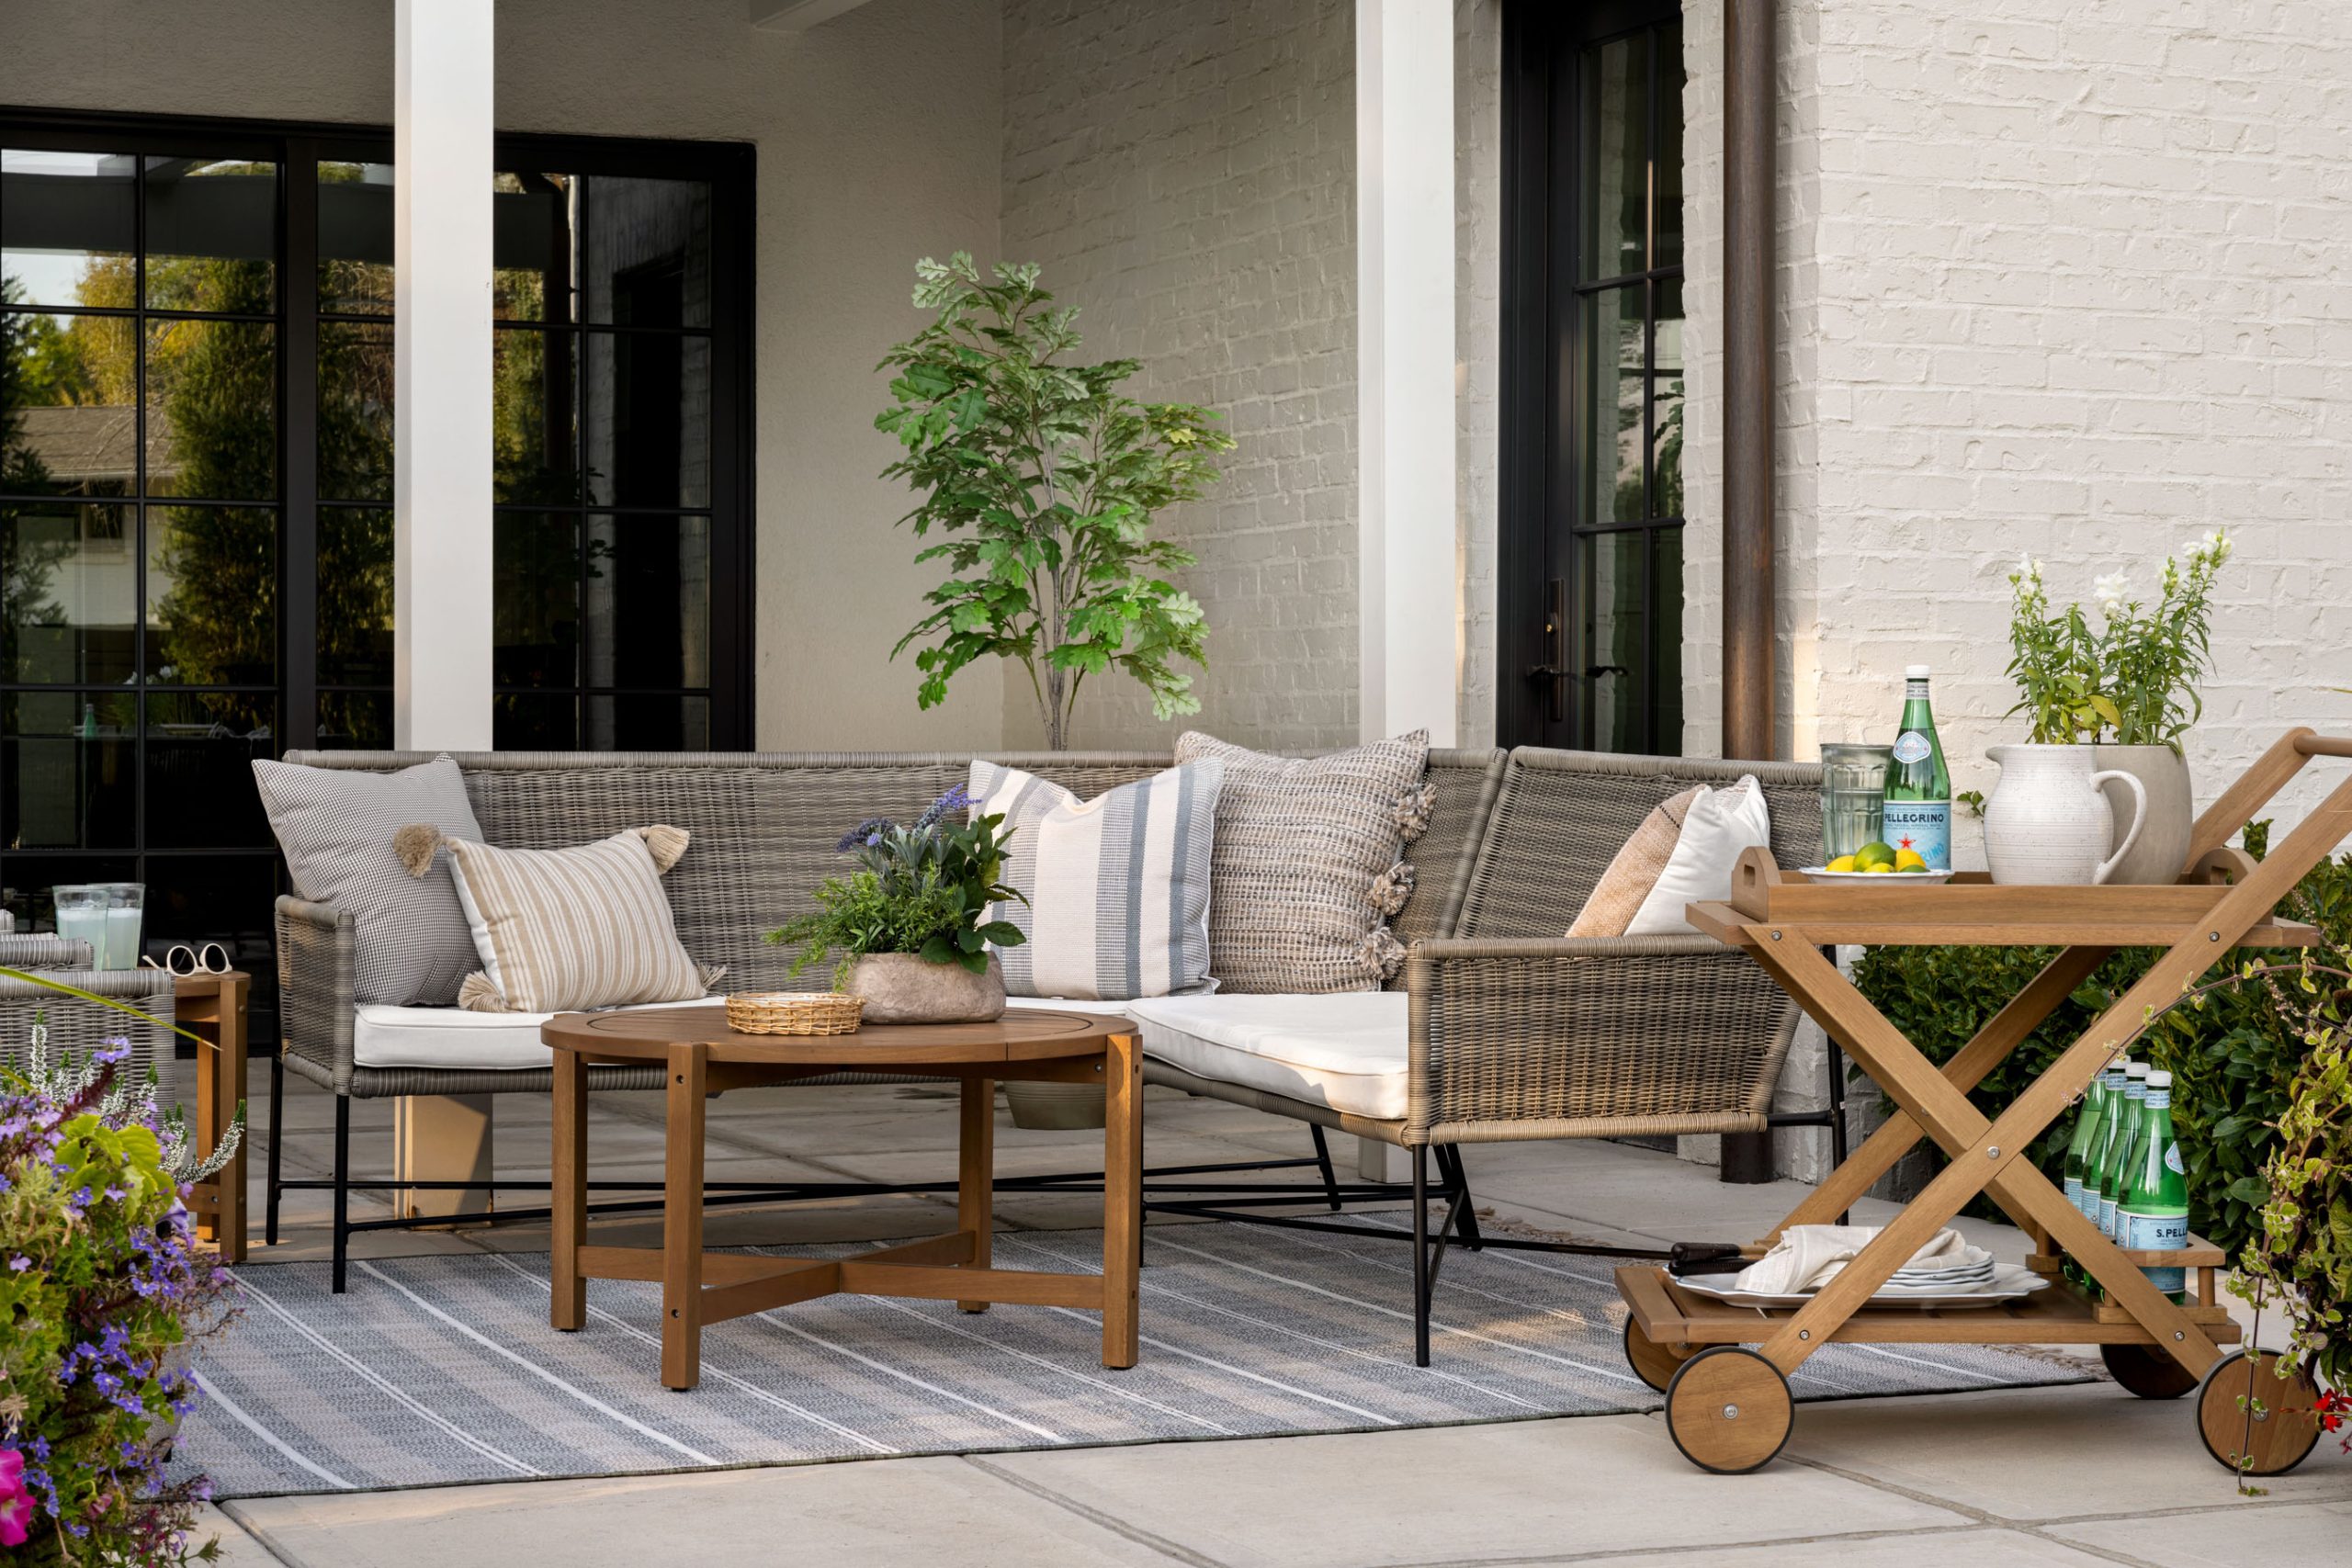 Outdoor living area with woven sectional and wood bar cart